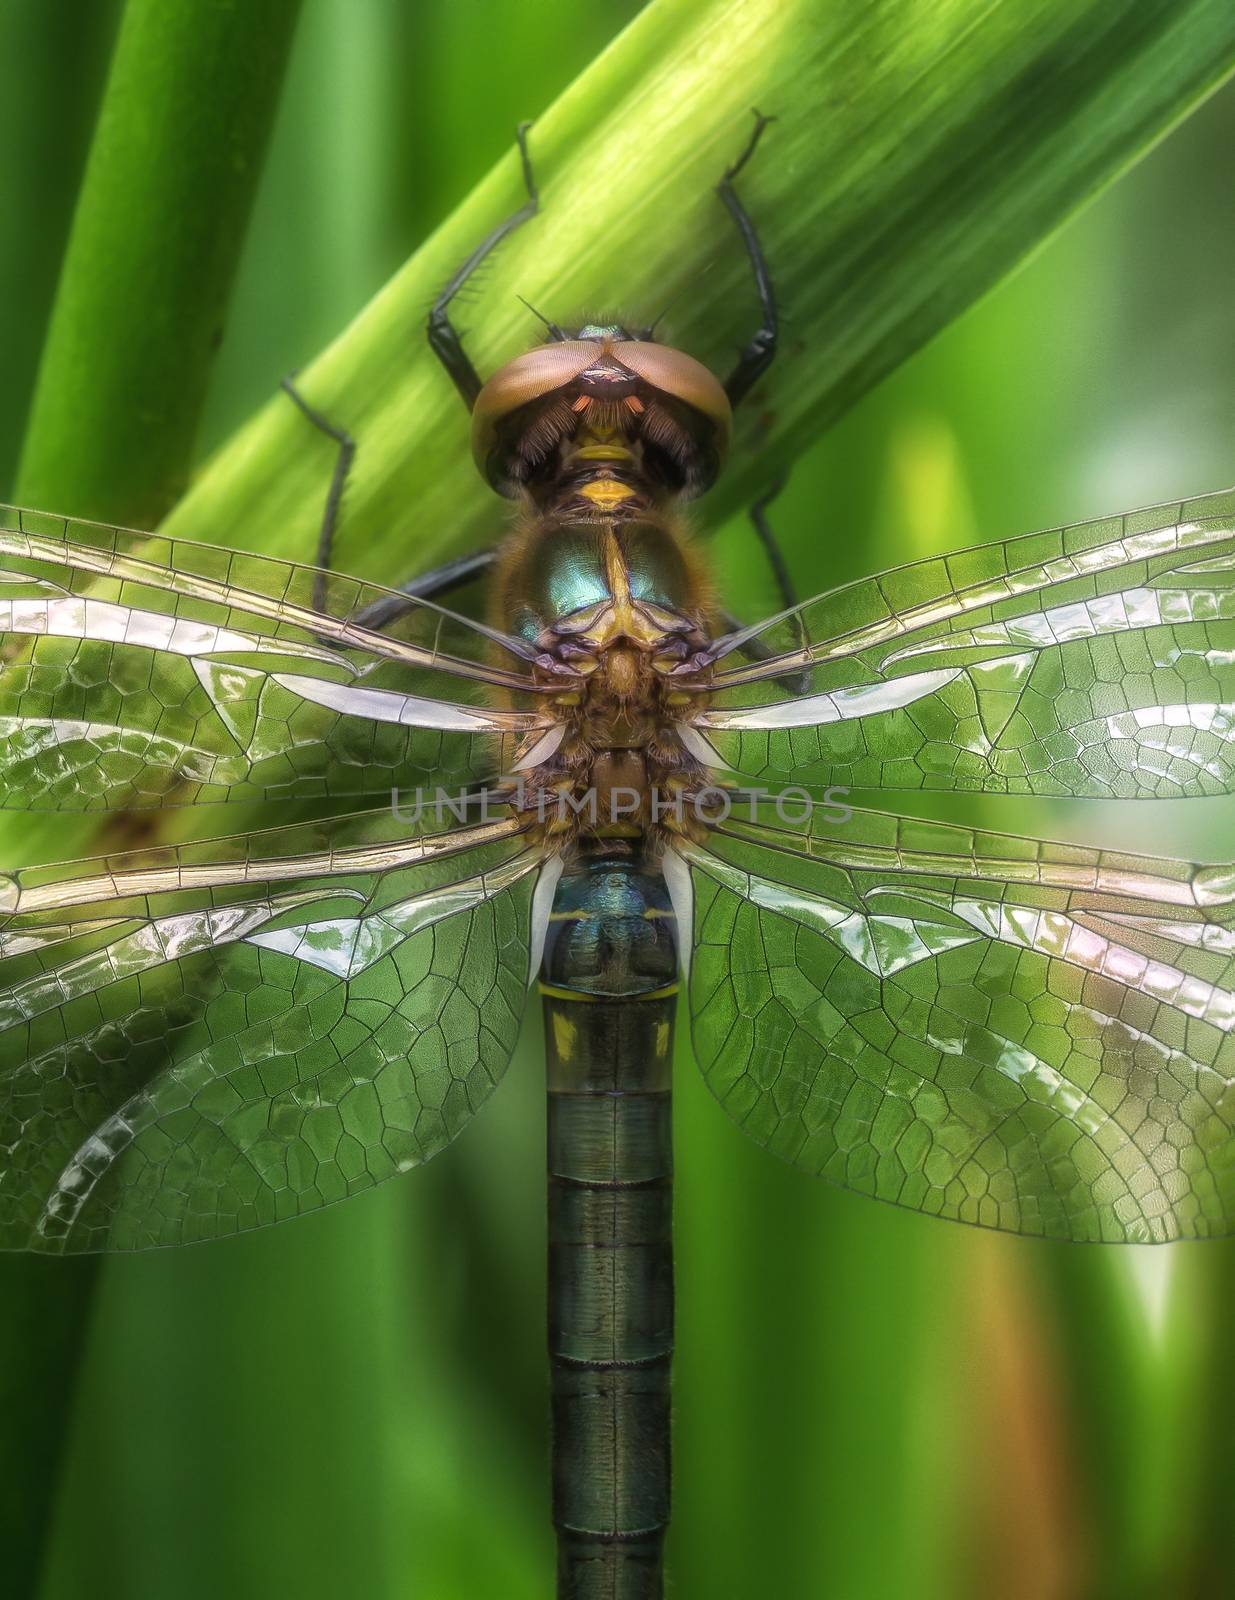 A close-up from a big dragon fly in the gras